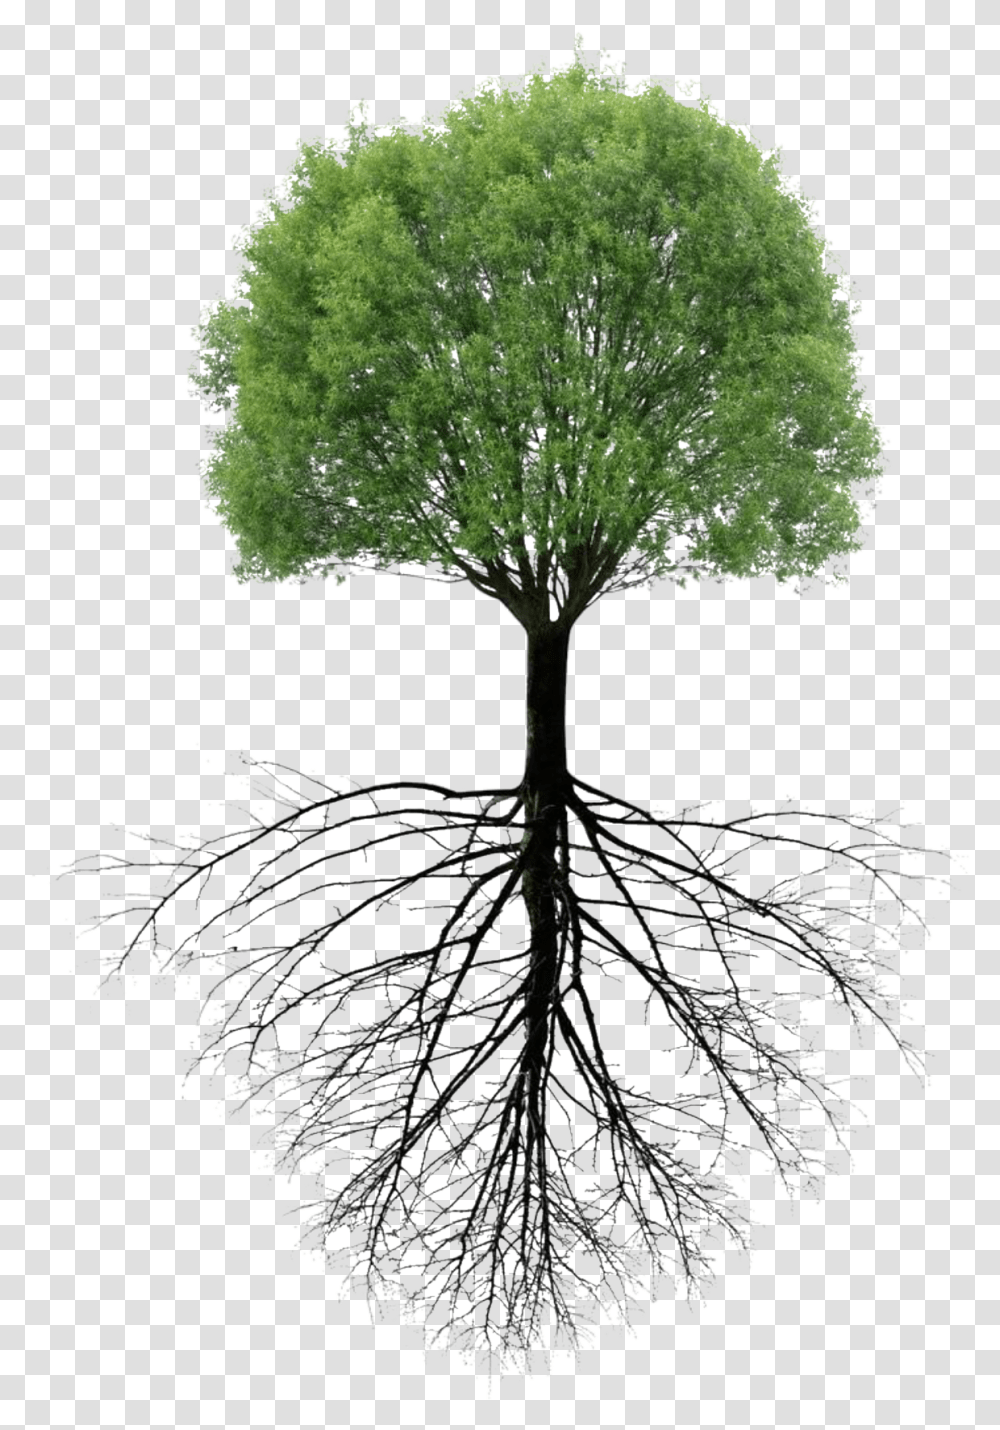 Tree Roots Tree With Roots, Plant, Bonsai, Potted Plant, Vase Transparent Png